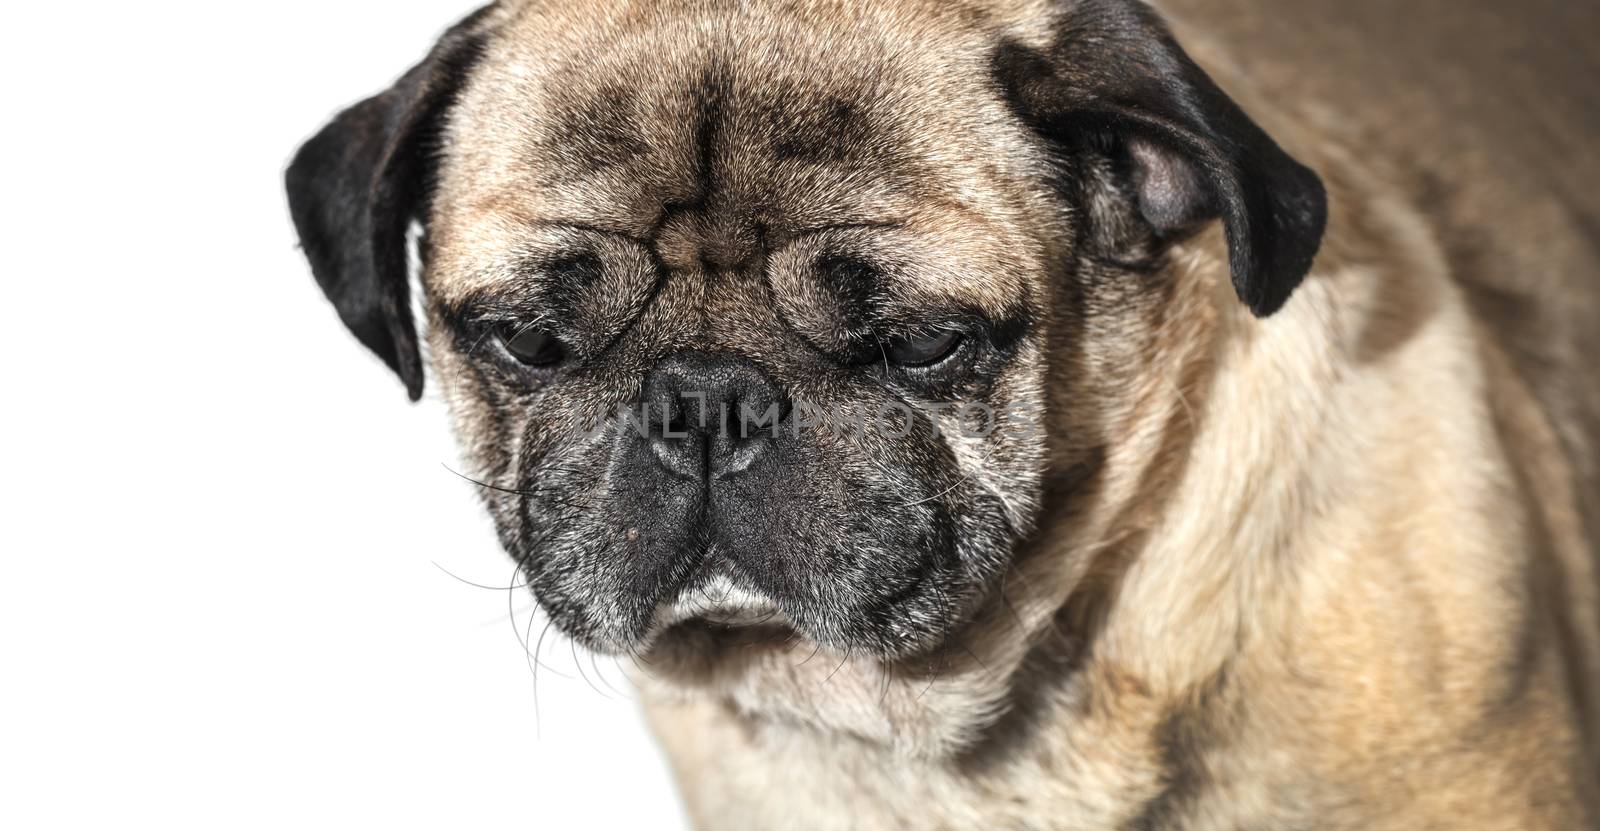 portrait of a pug close-up on white background